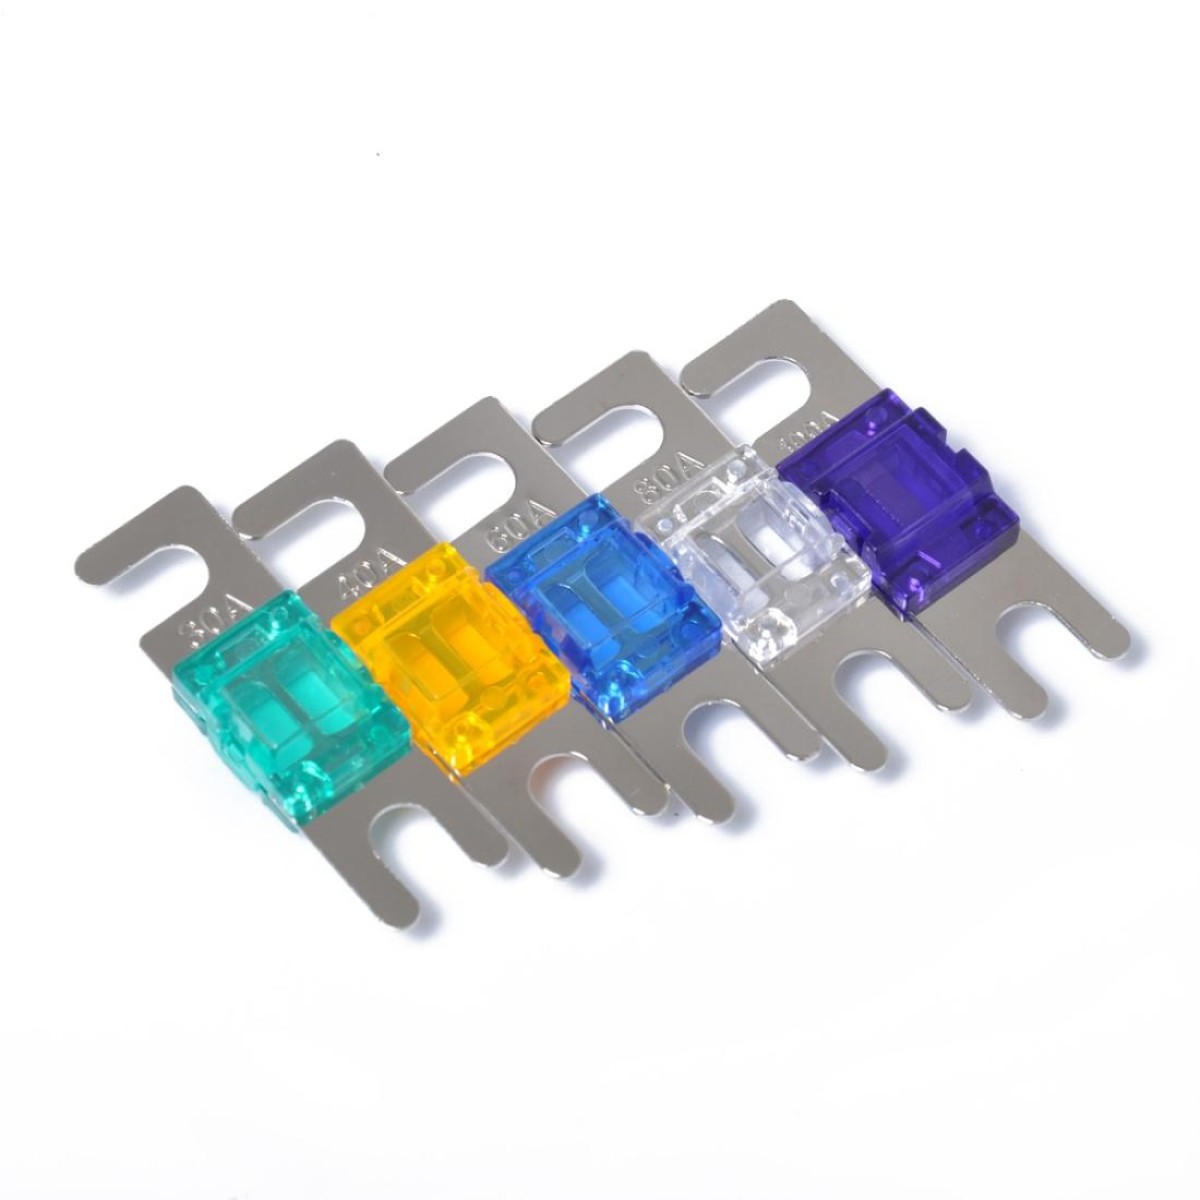 5 PCS Car Audio AFS Mini ANL 30A 40A 60A 80A 100Amp Fuse Nicked Plated